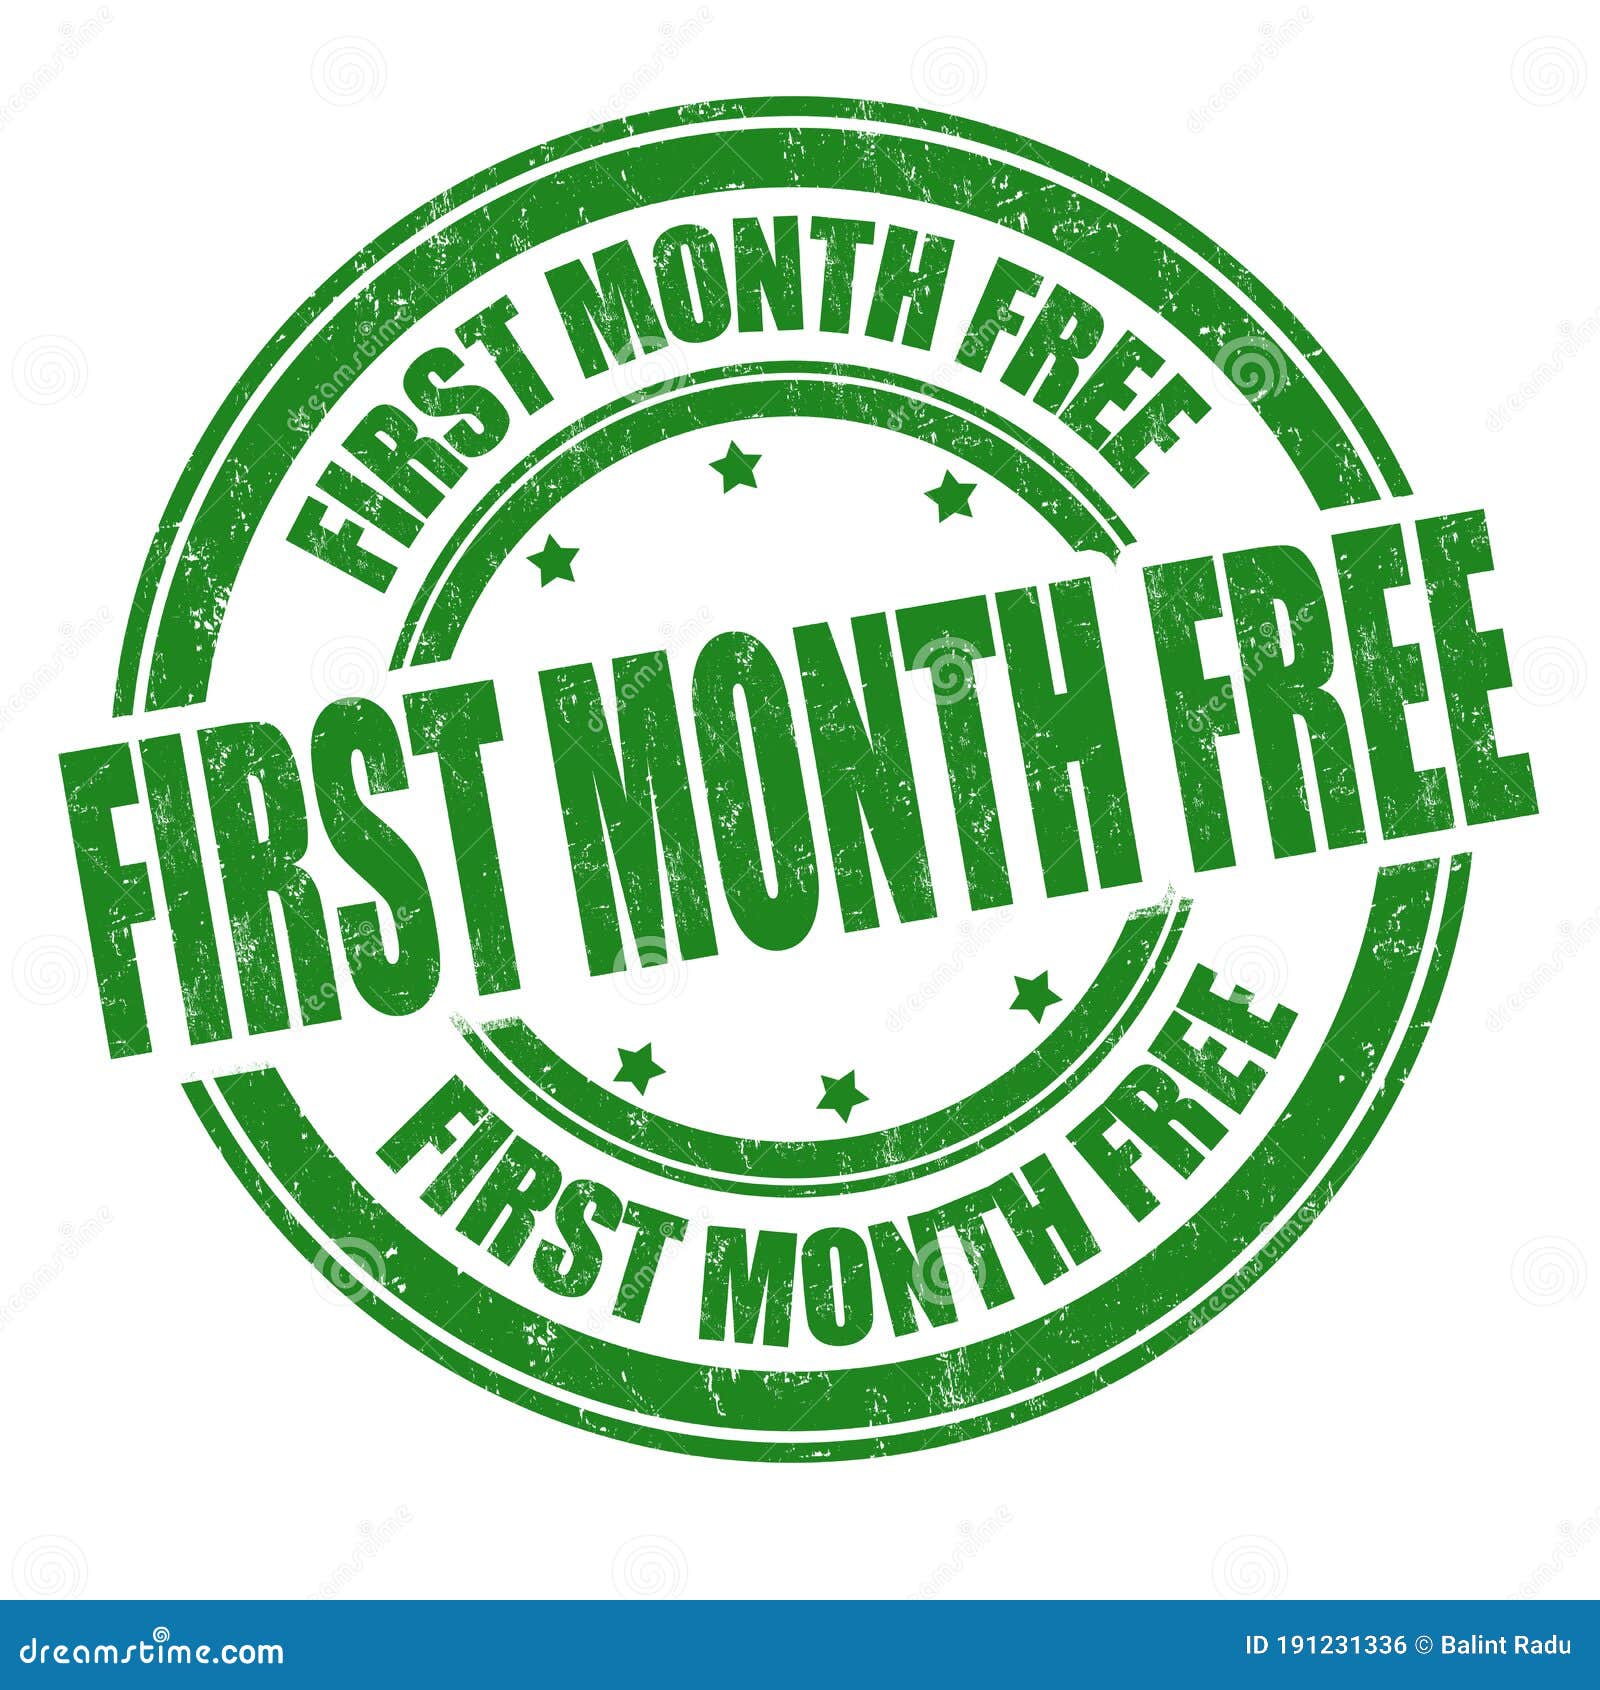 first month free for grammarly